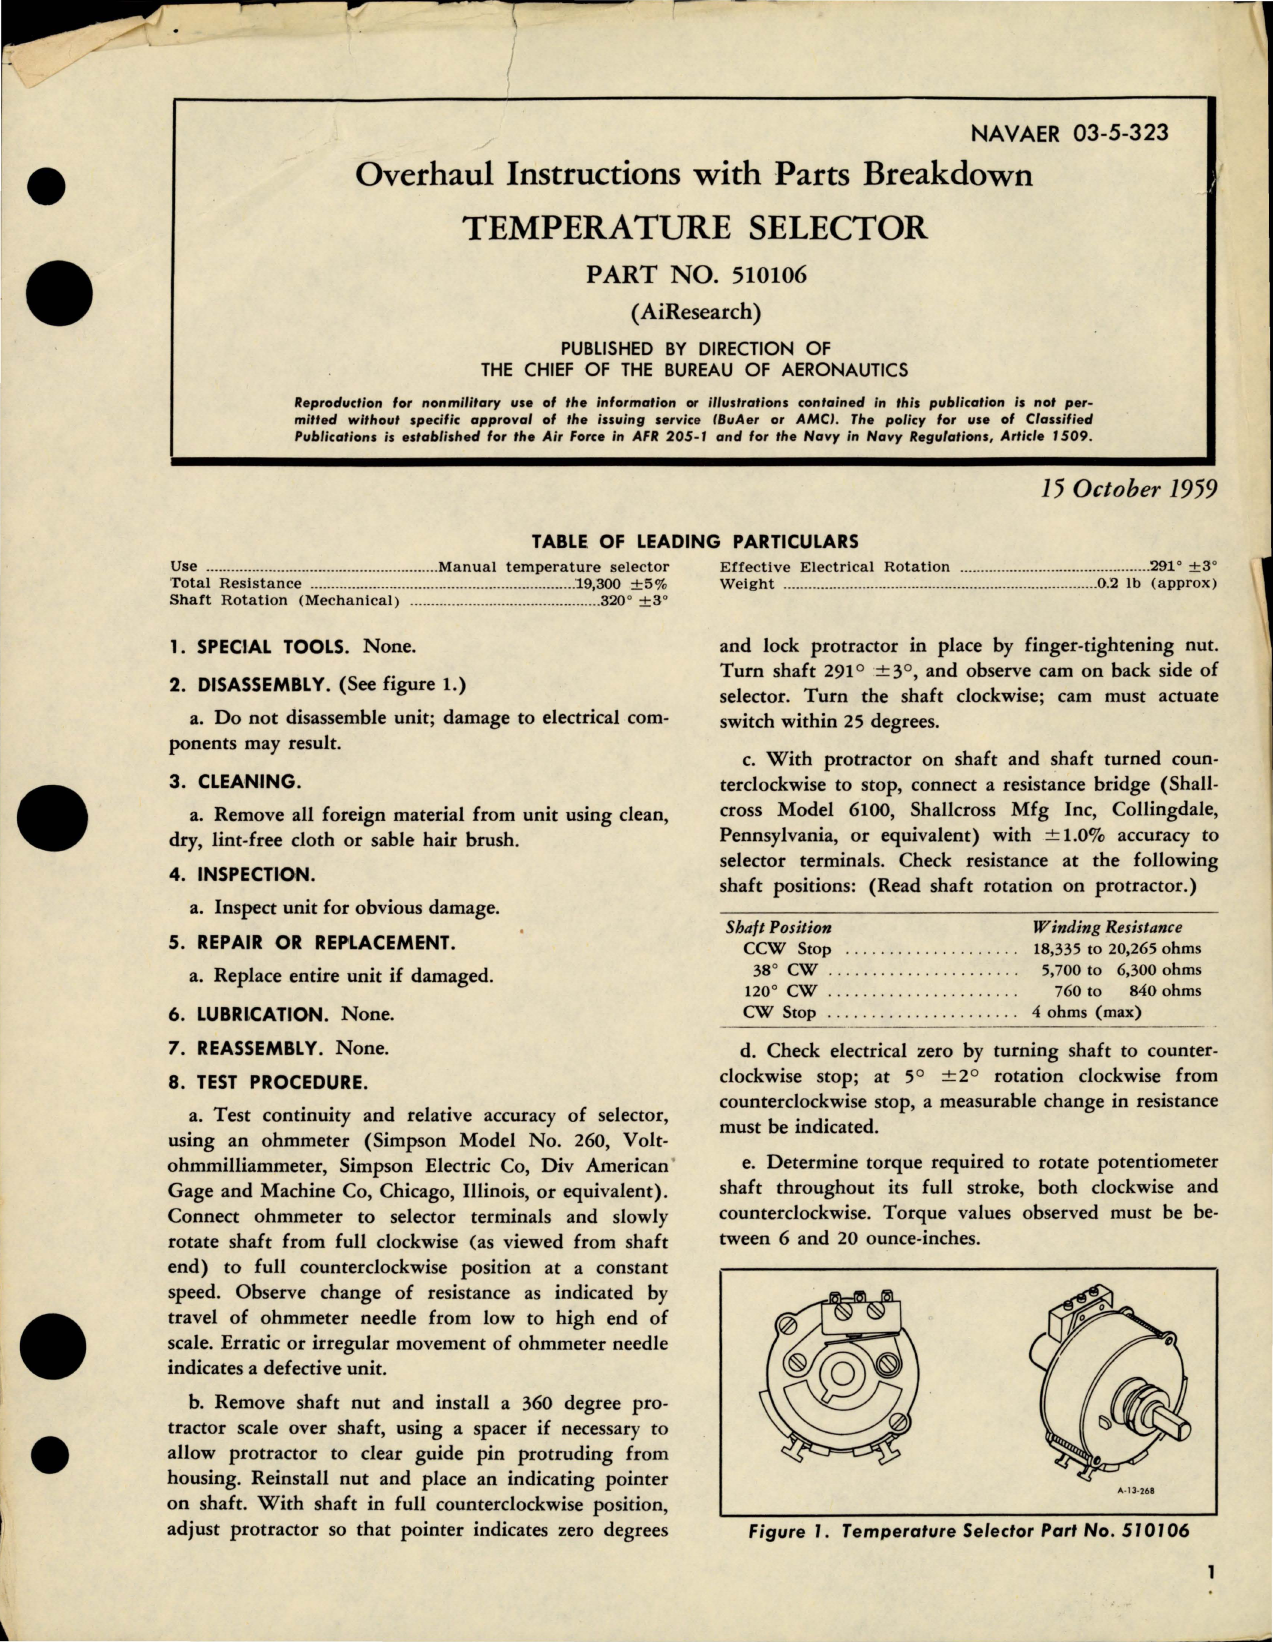 Sample page 1 from AirCorps Library document: Overhaul Instructions with Parts for Temperature Selector - Part 510106 